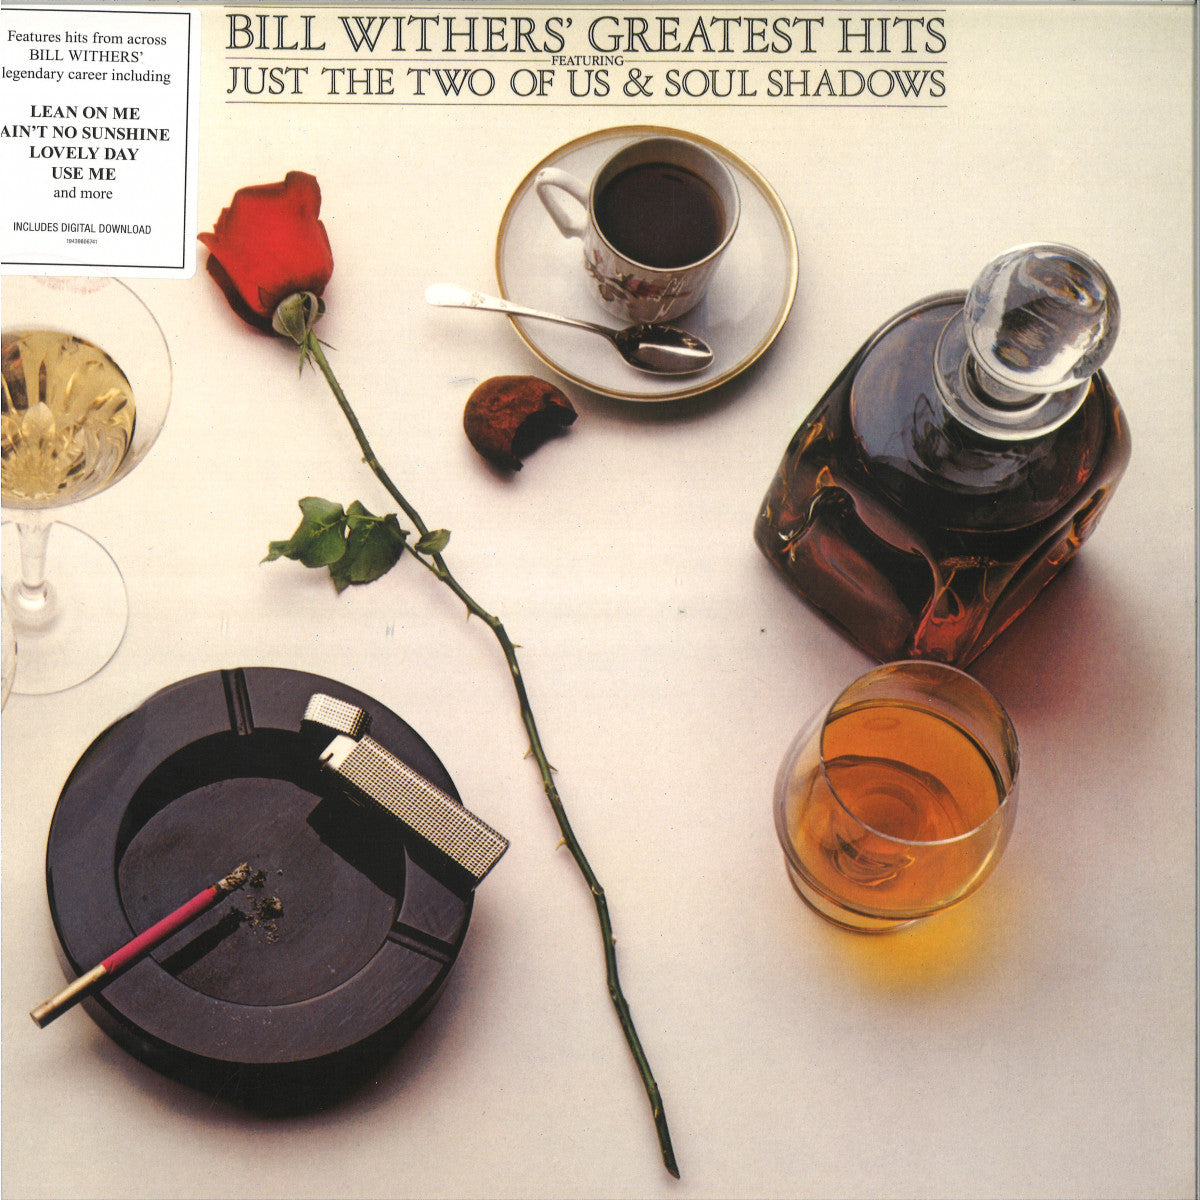 BILL WITHERS - Greatest Hits - LP - Vinyl